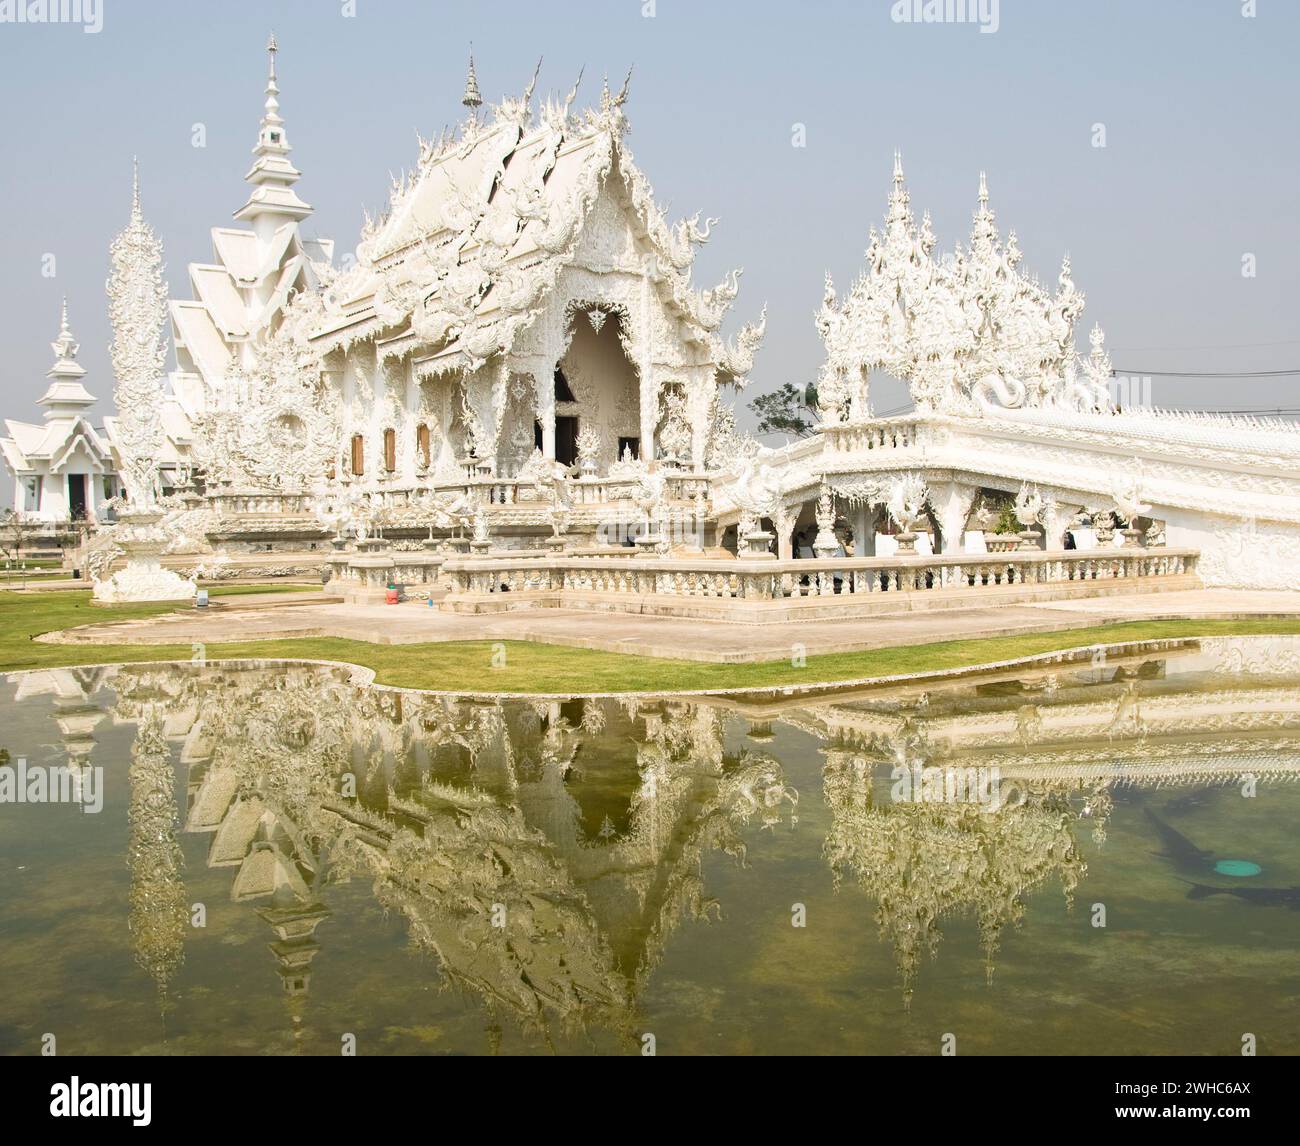 The temple Wat Rong Khun near Chiang Rai in the north of Thailand. Stock Photo